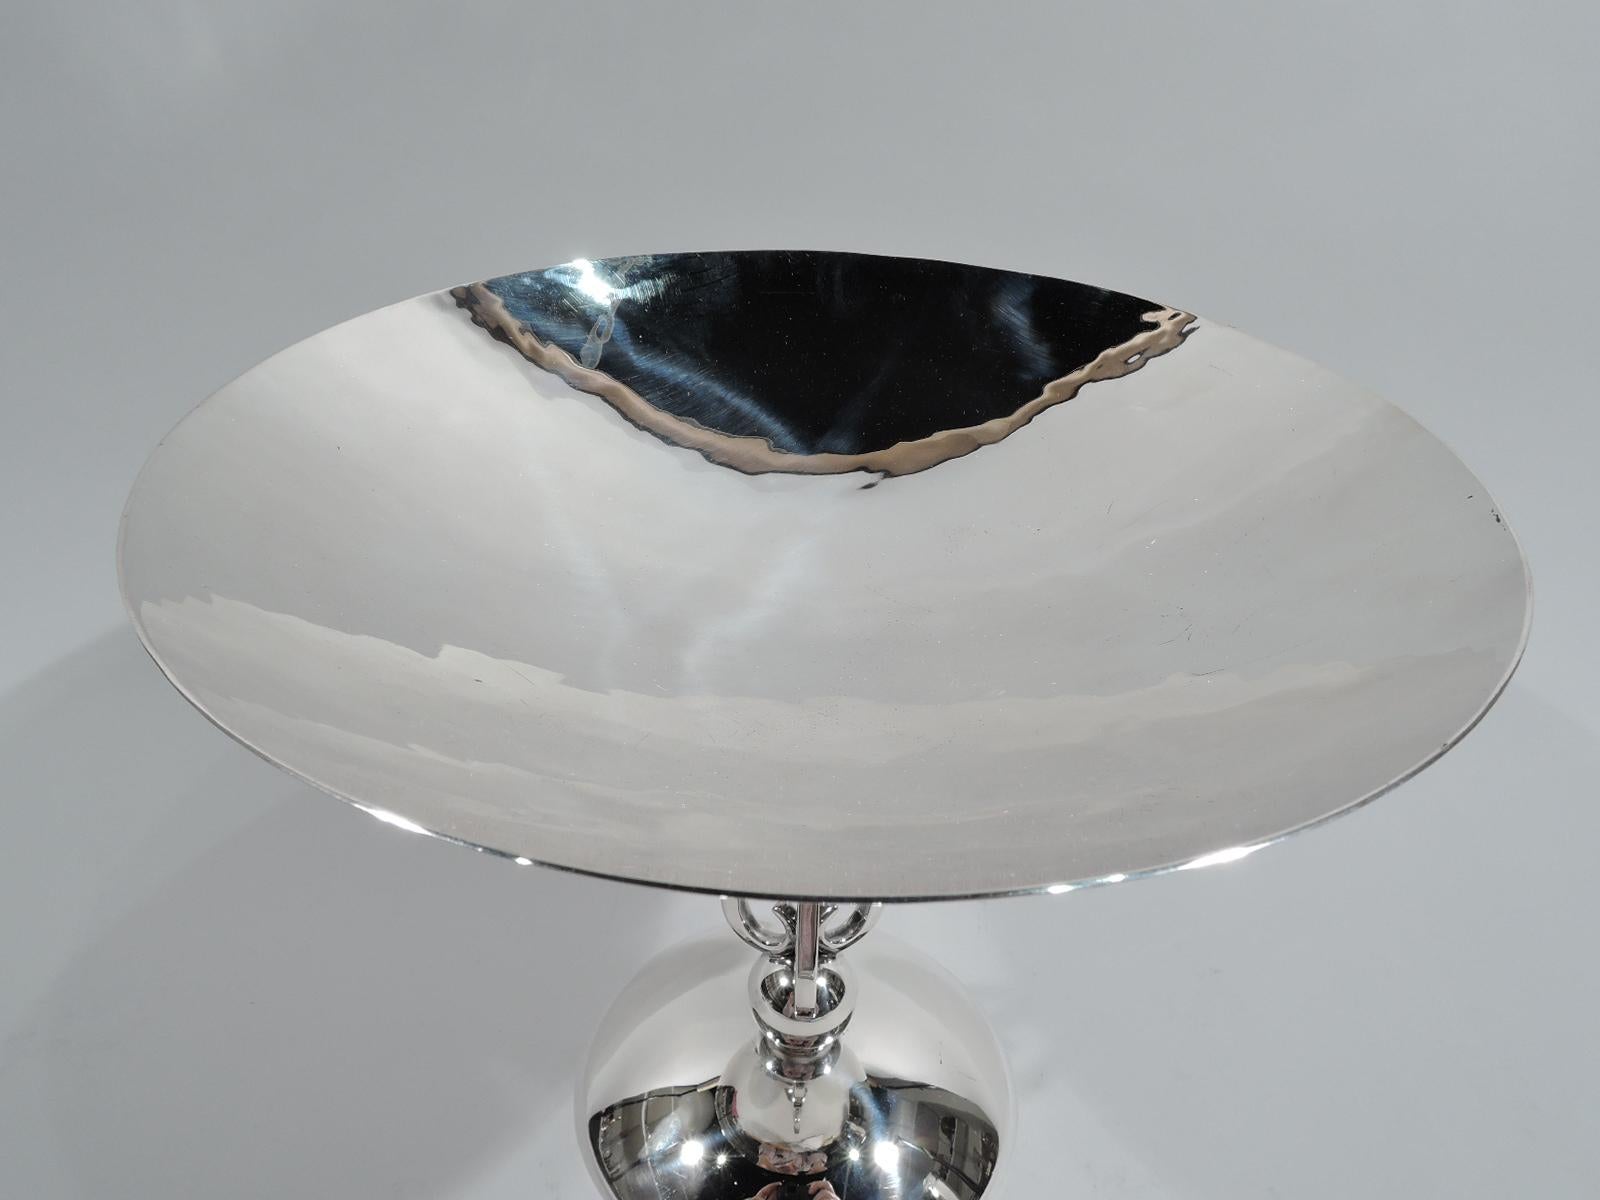 American Mid-Century Modern Compote by Sciarrotta for Cartier